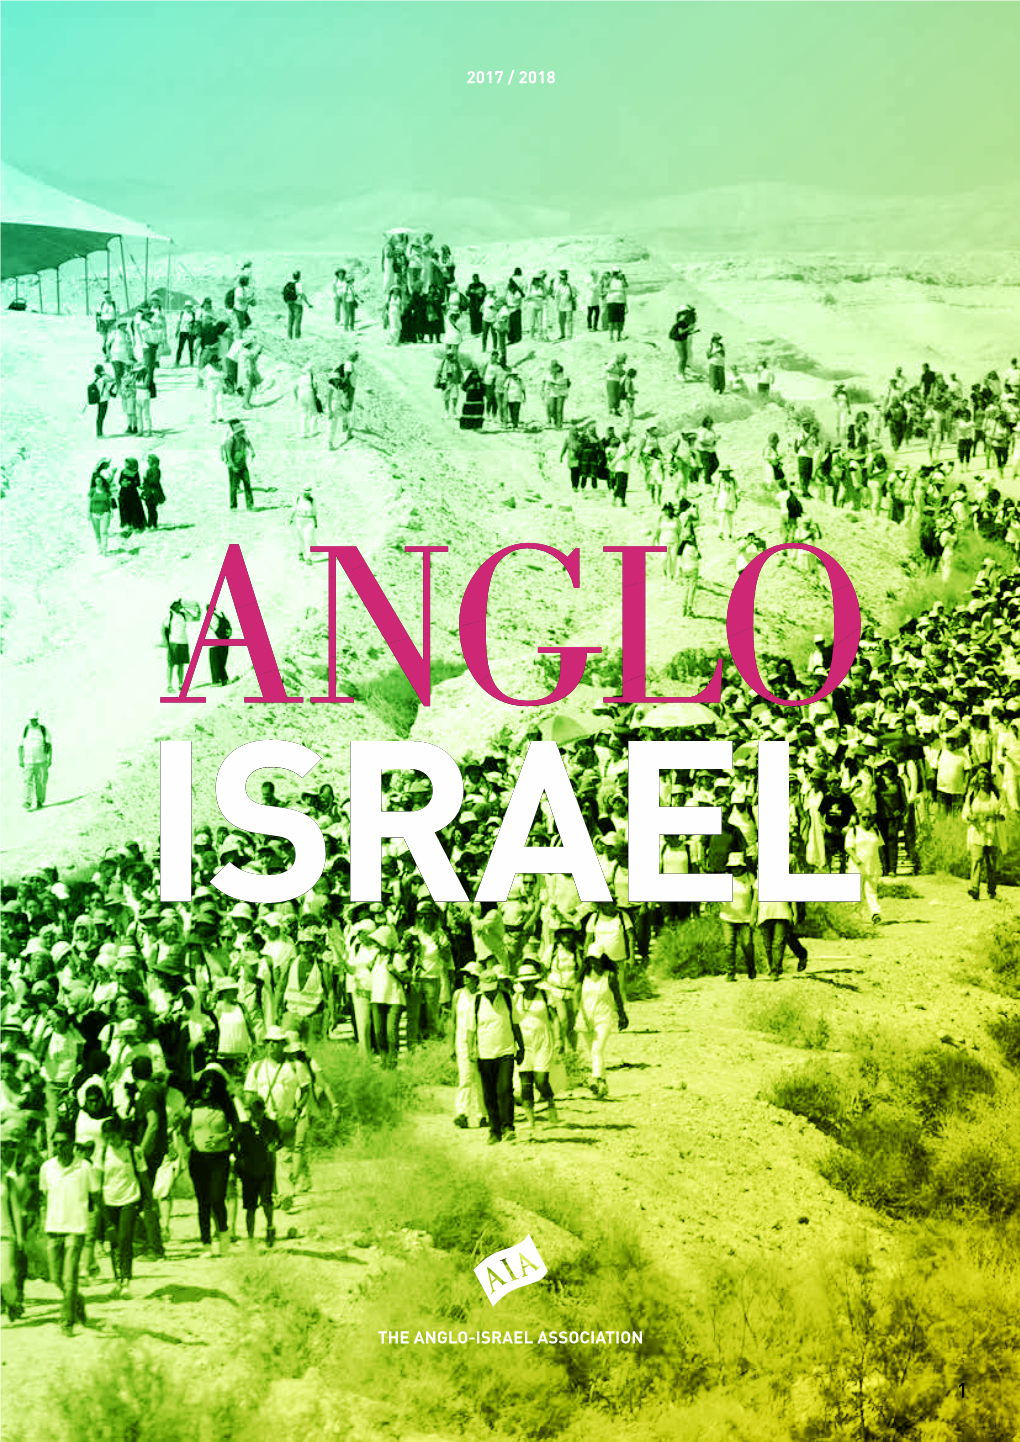 The Anglo-Israel Association 2017 / 2018